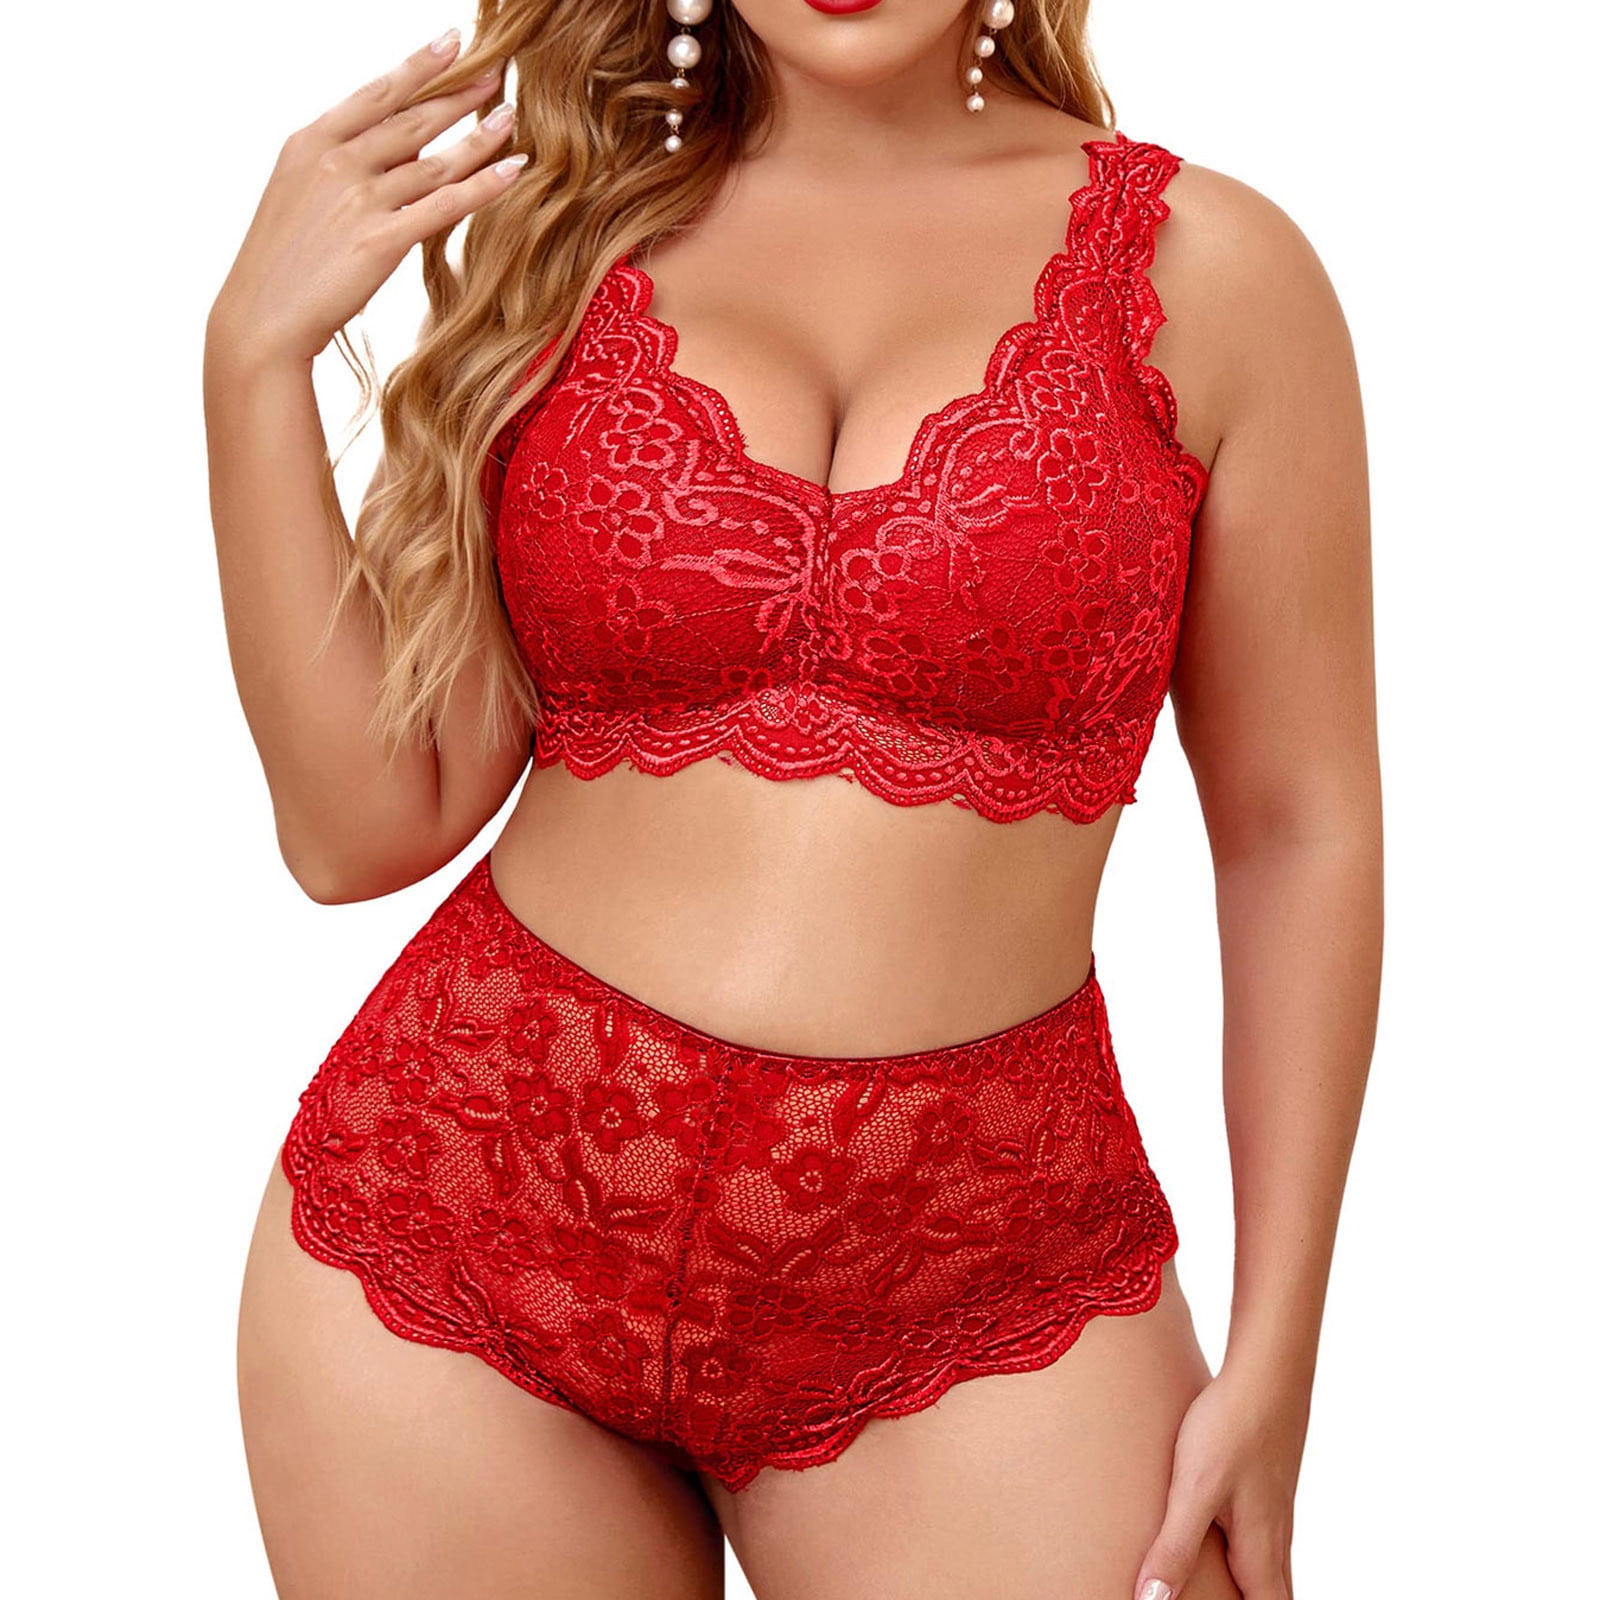 Vedolay Plus Size Lingerie Women's Plus Size Bras Full Coverage Lace  Underwire Unlined Bra,Rose Gold 40